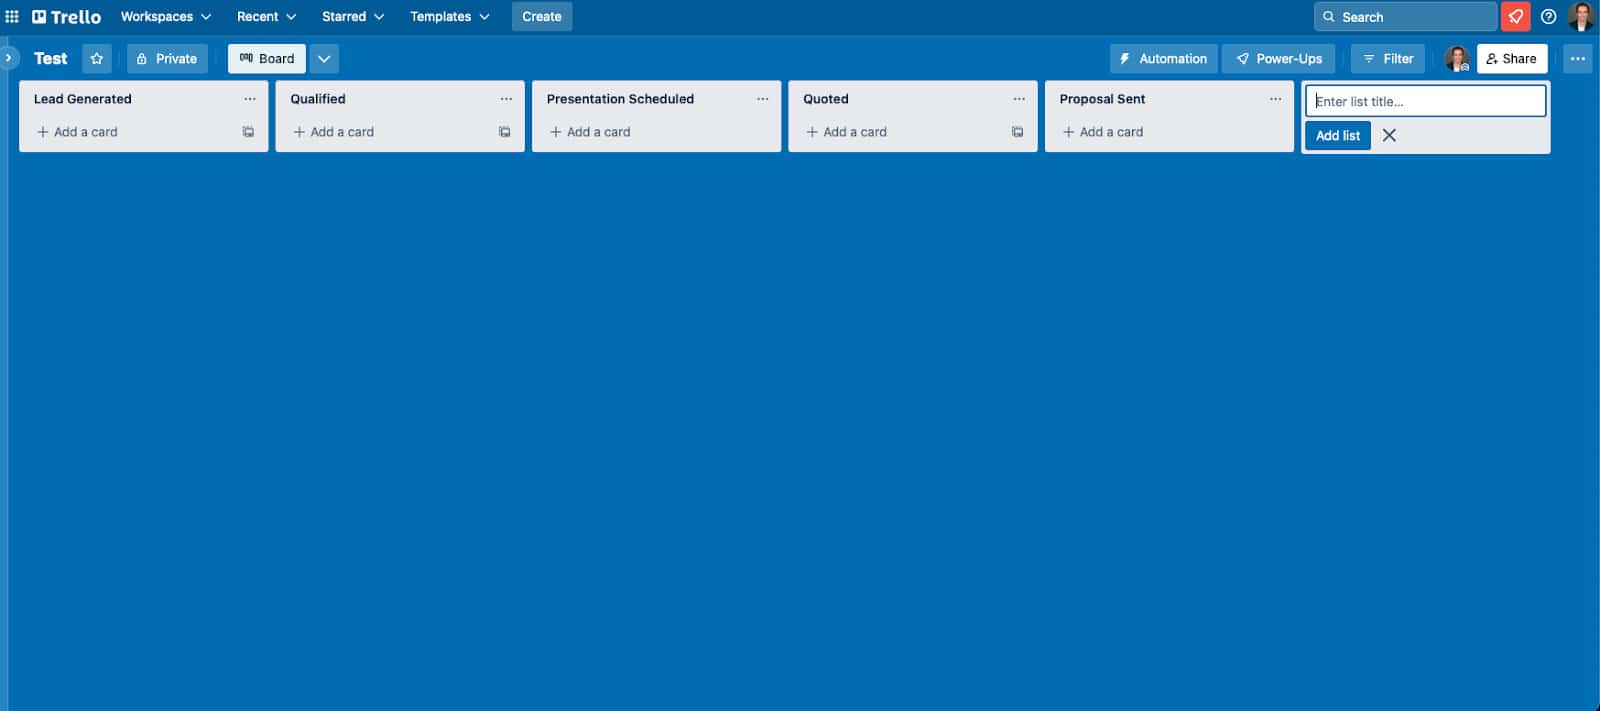 Trello's drag-and-drop capabilities to move lists.